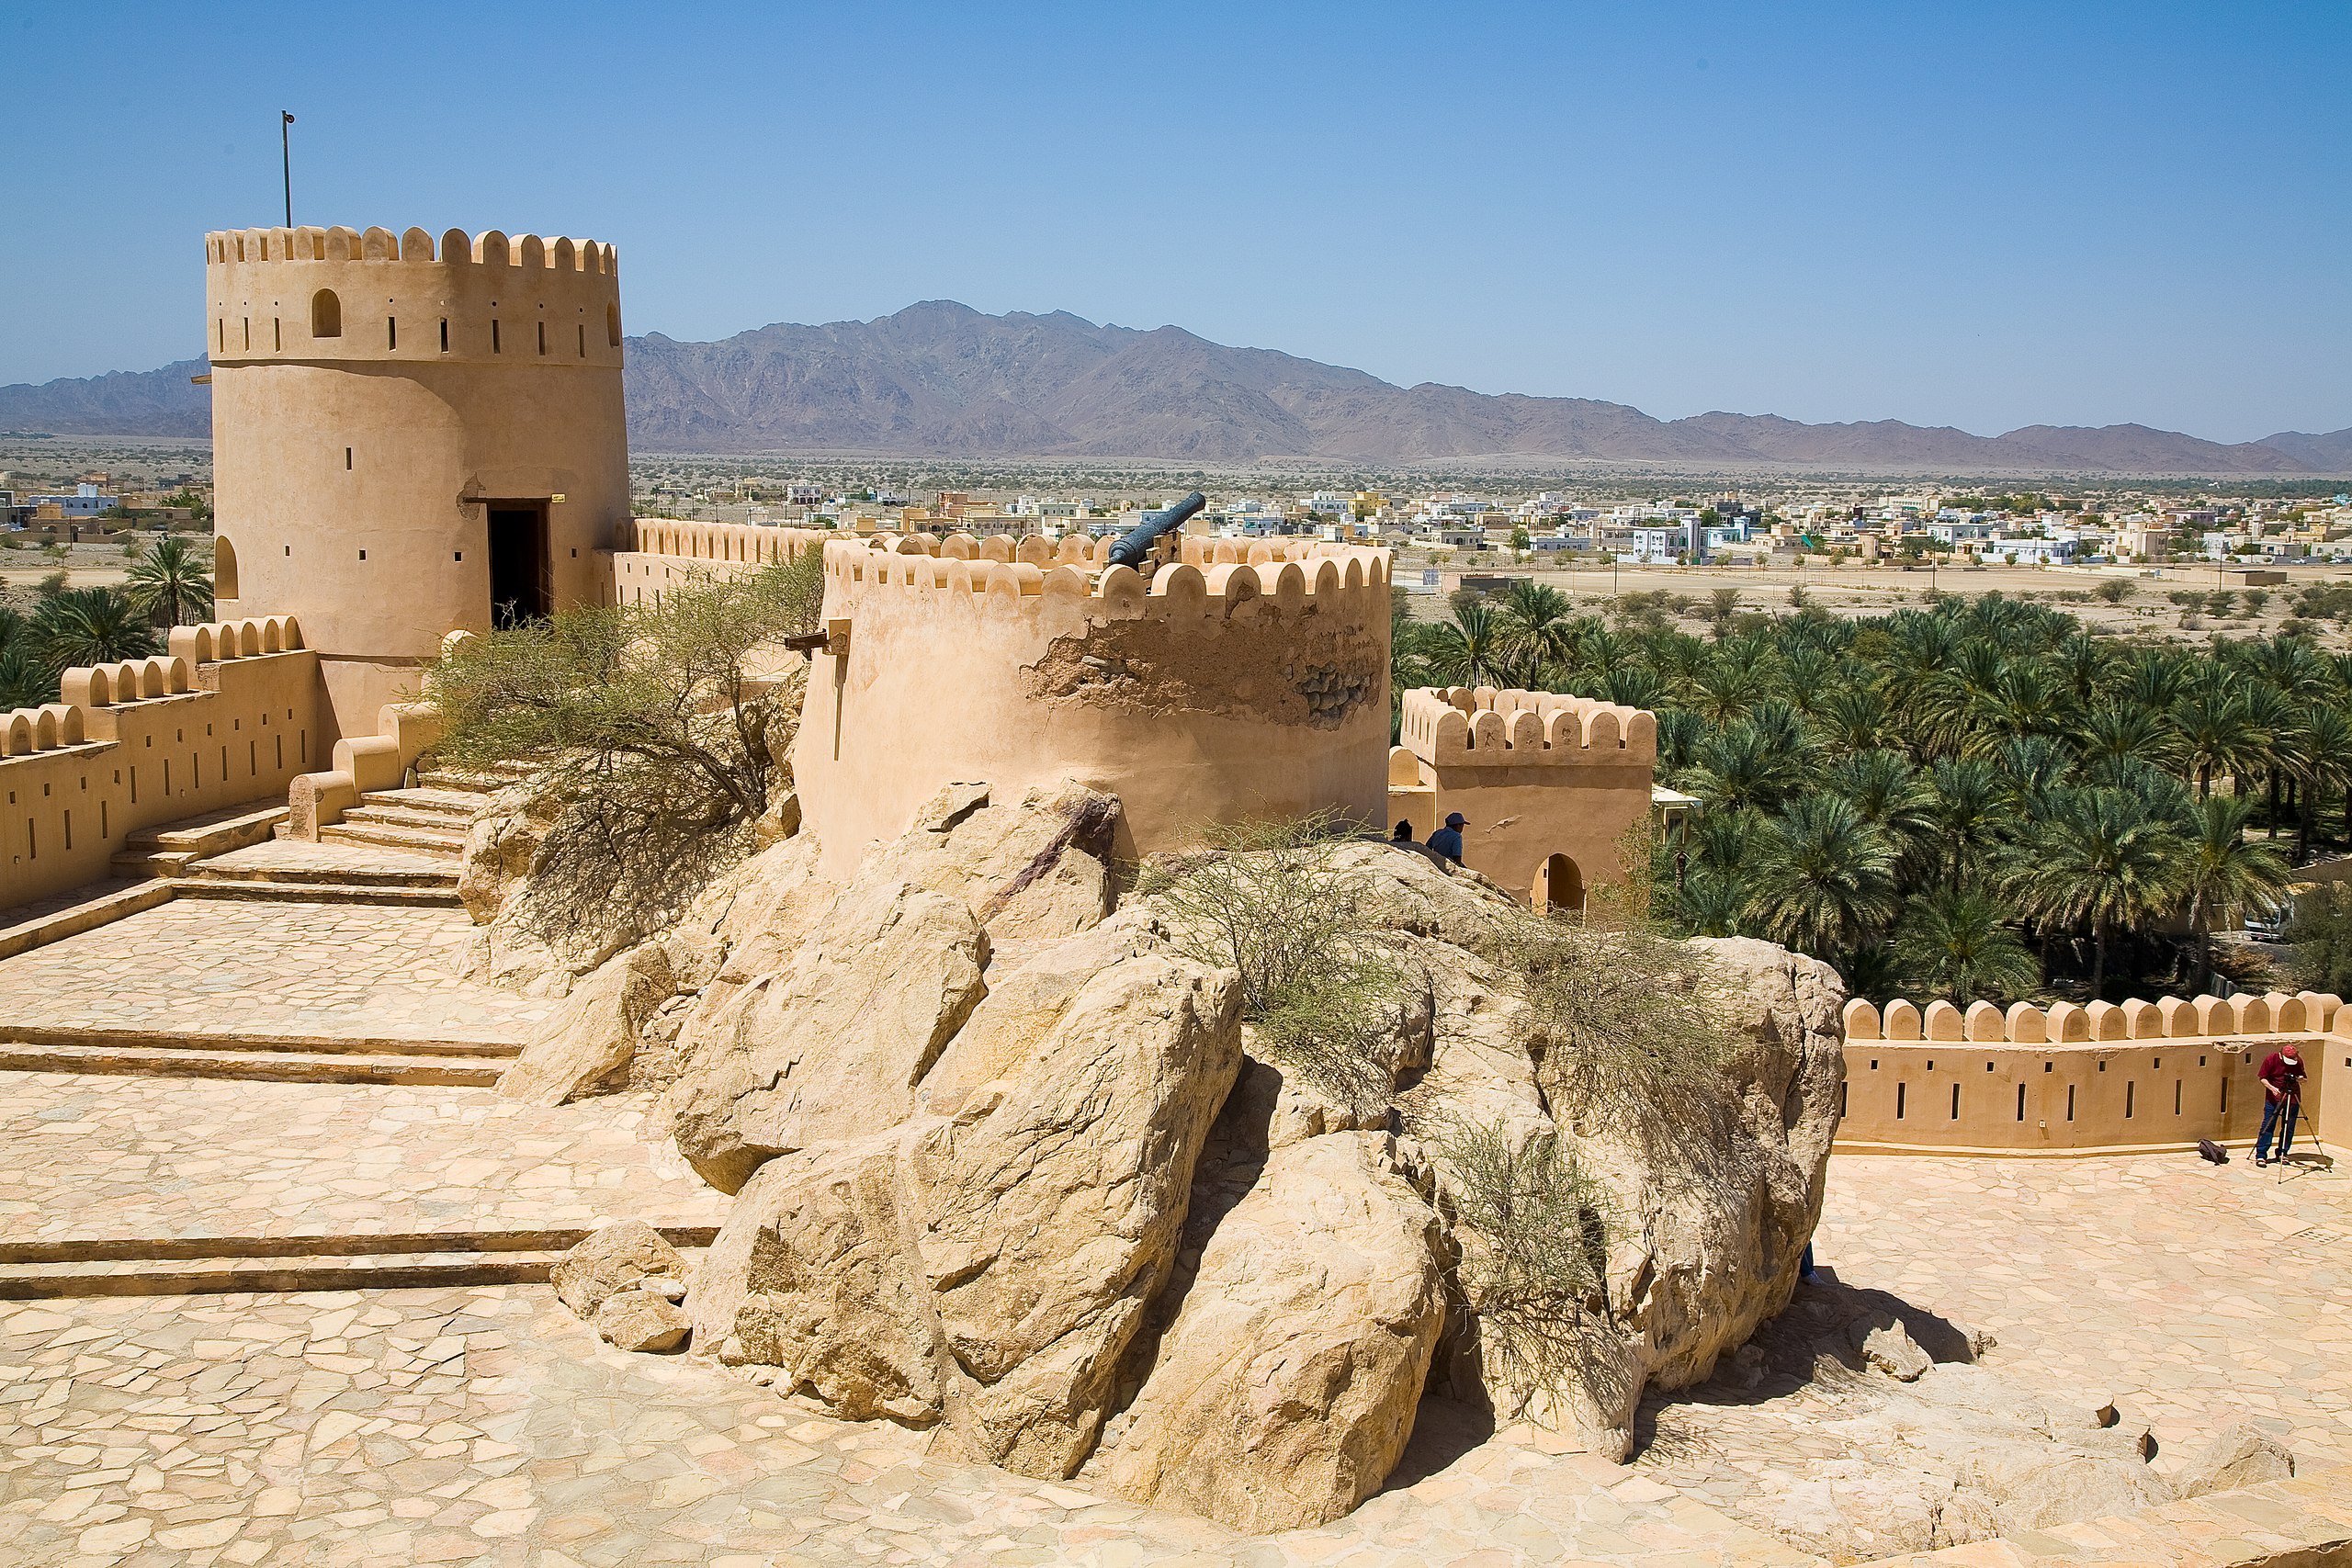 <p>Nakhal Fort immediately catches the eye for its unusual shape. <strong>Predating the Islamic era</strong>, the castle was originally built around a large boulder near the base of Mount Nakhal. </p>  <p>Initially, the fort was built to protect trade routes, but over time, a mosque, reception halls, and residential quarters were added to the complex.</p>